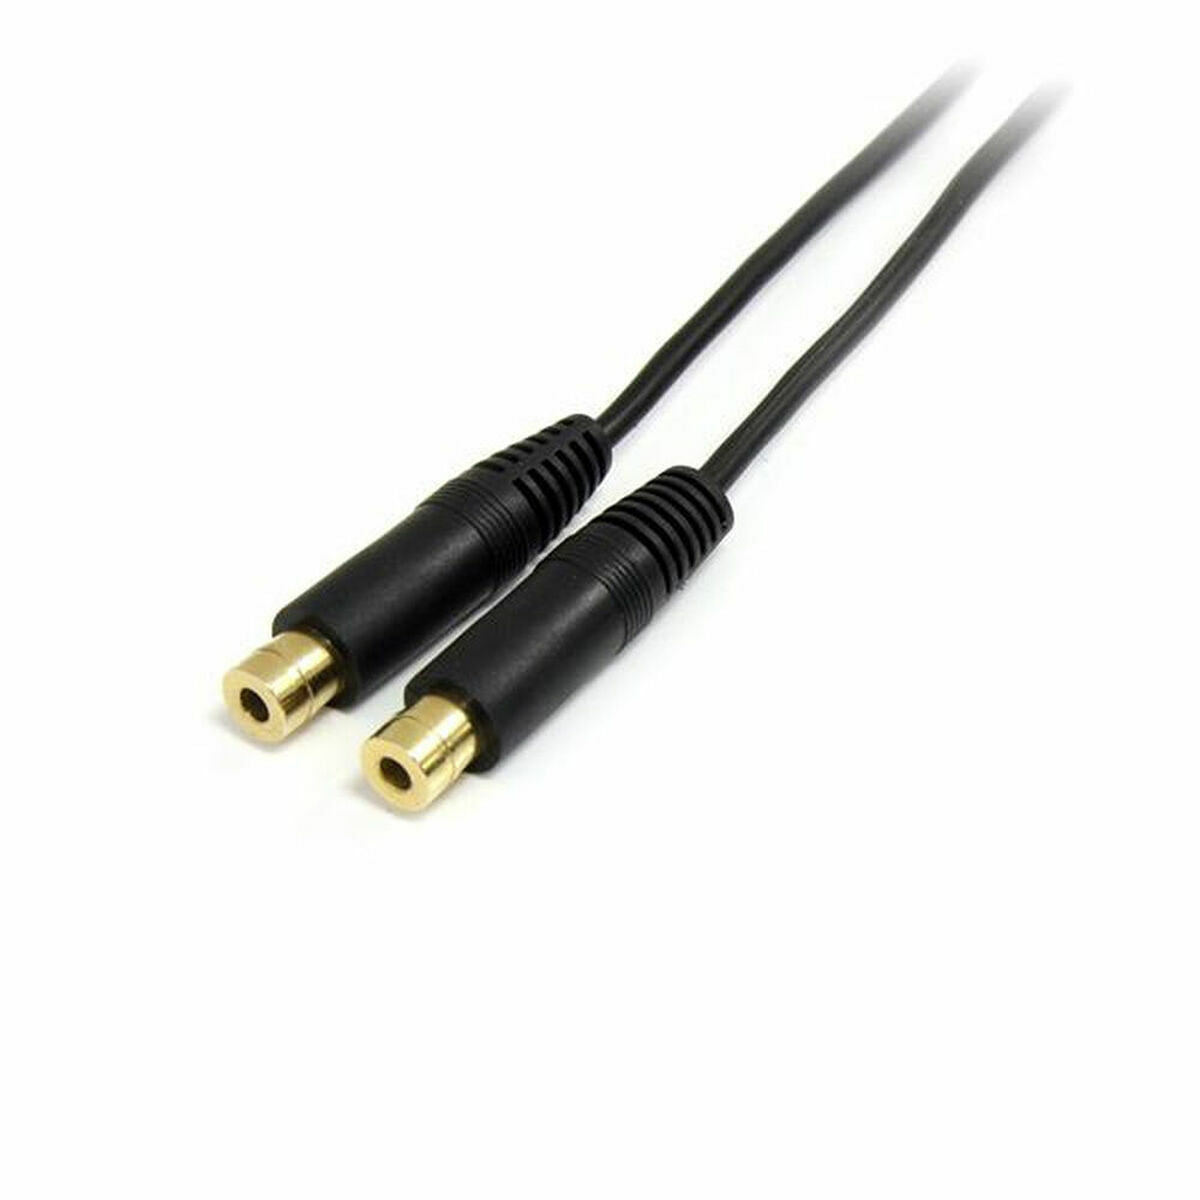 Audio Jack (3.5 mm) Splitter Cable Startech MUY1MFF